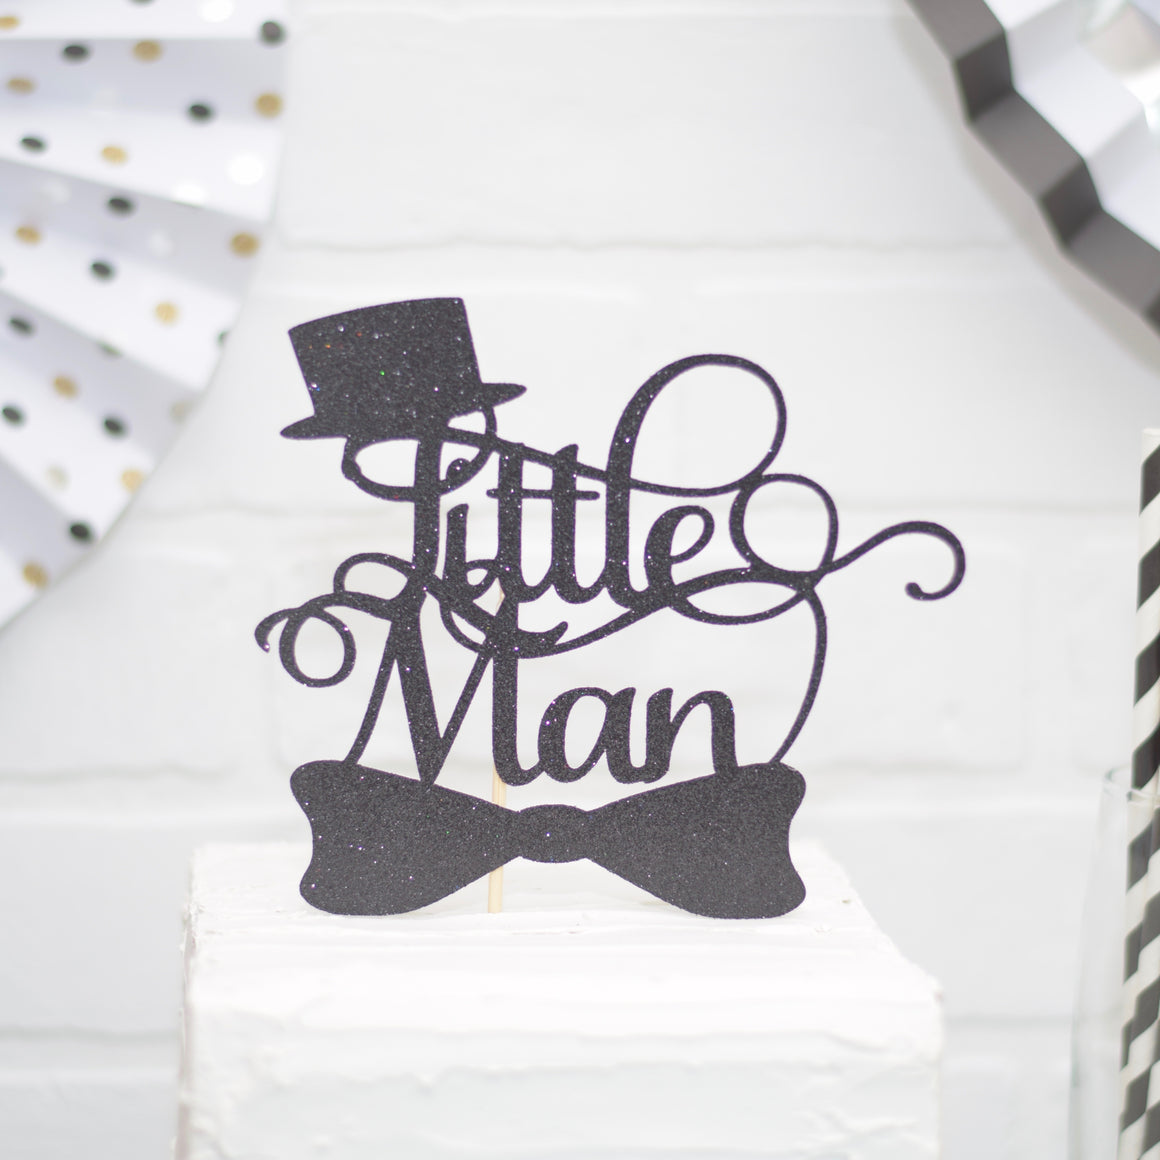 Black Little man Cake topper with top hat and bowtie